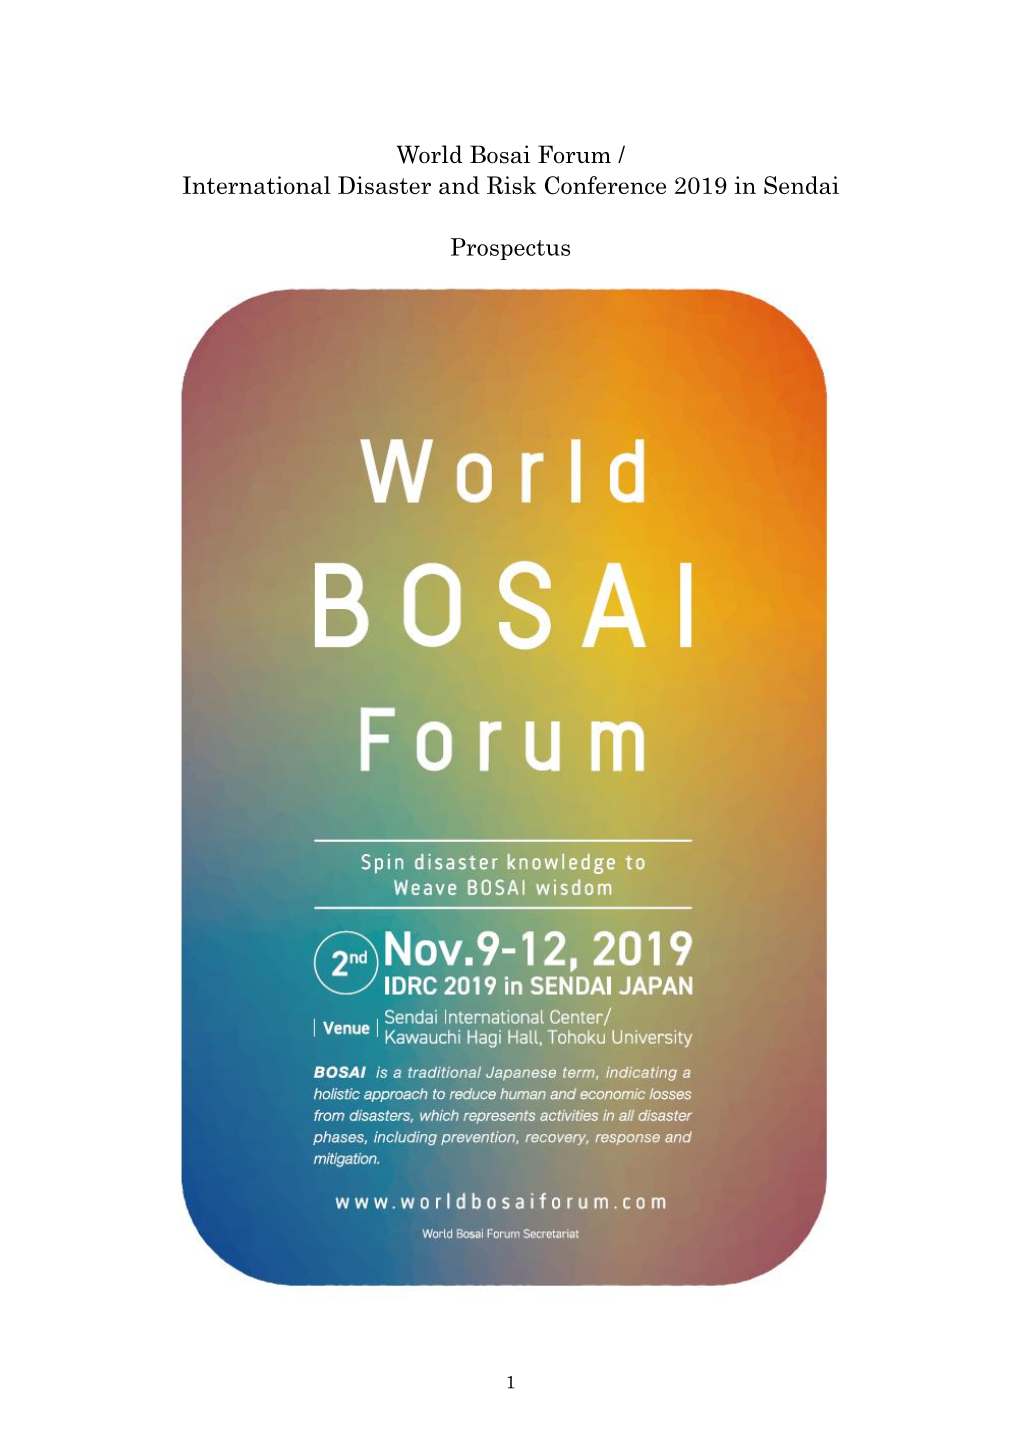 World Bosai Forum / International Disaster and Risk Conference 2019 in Sendai